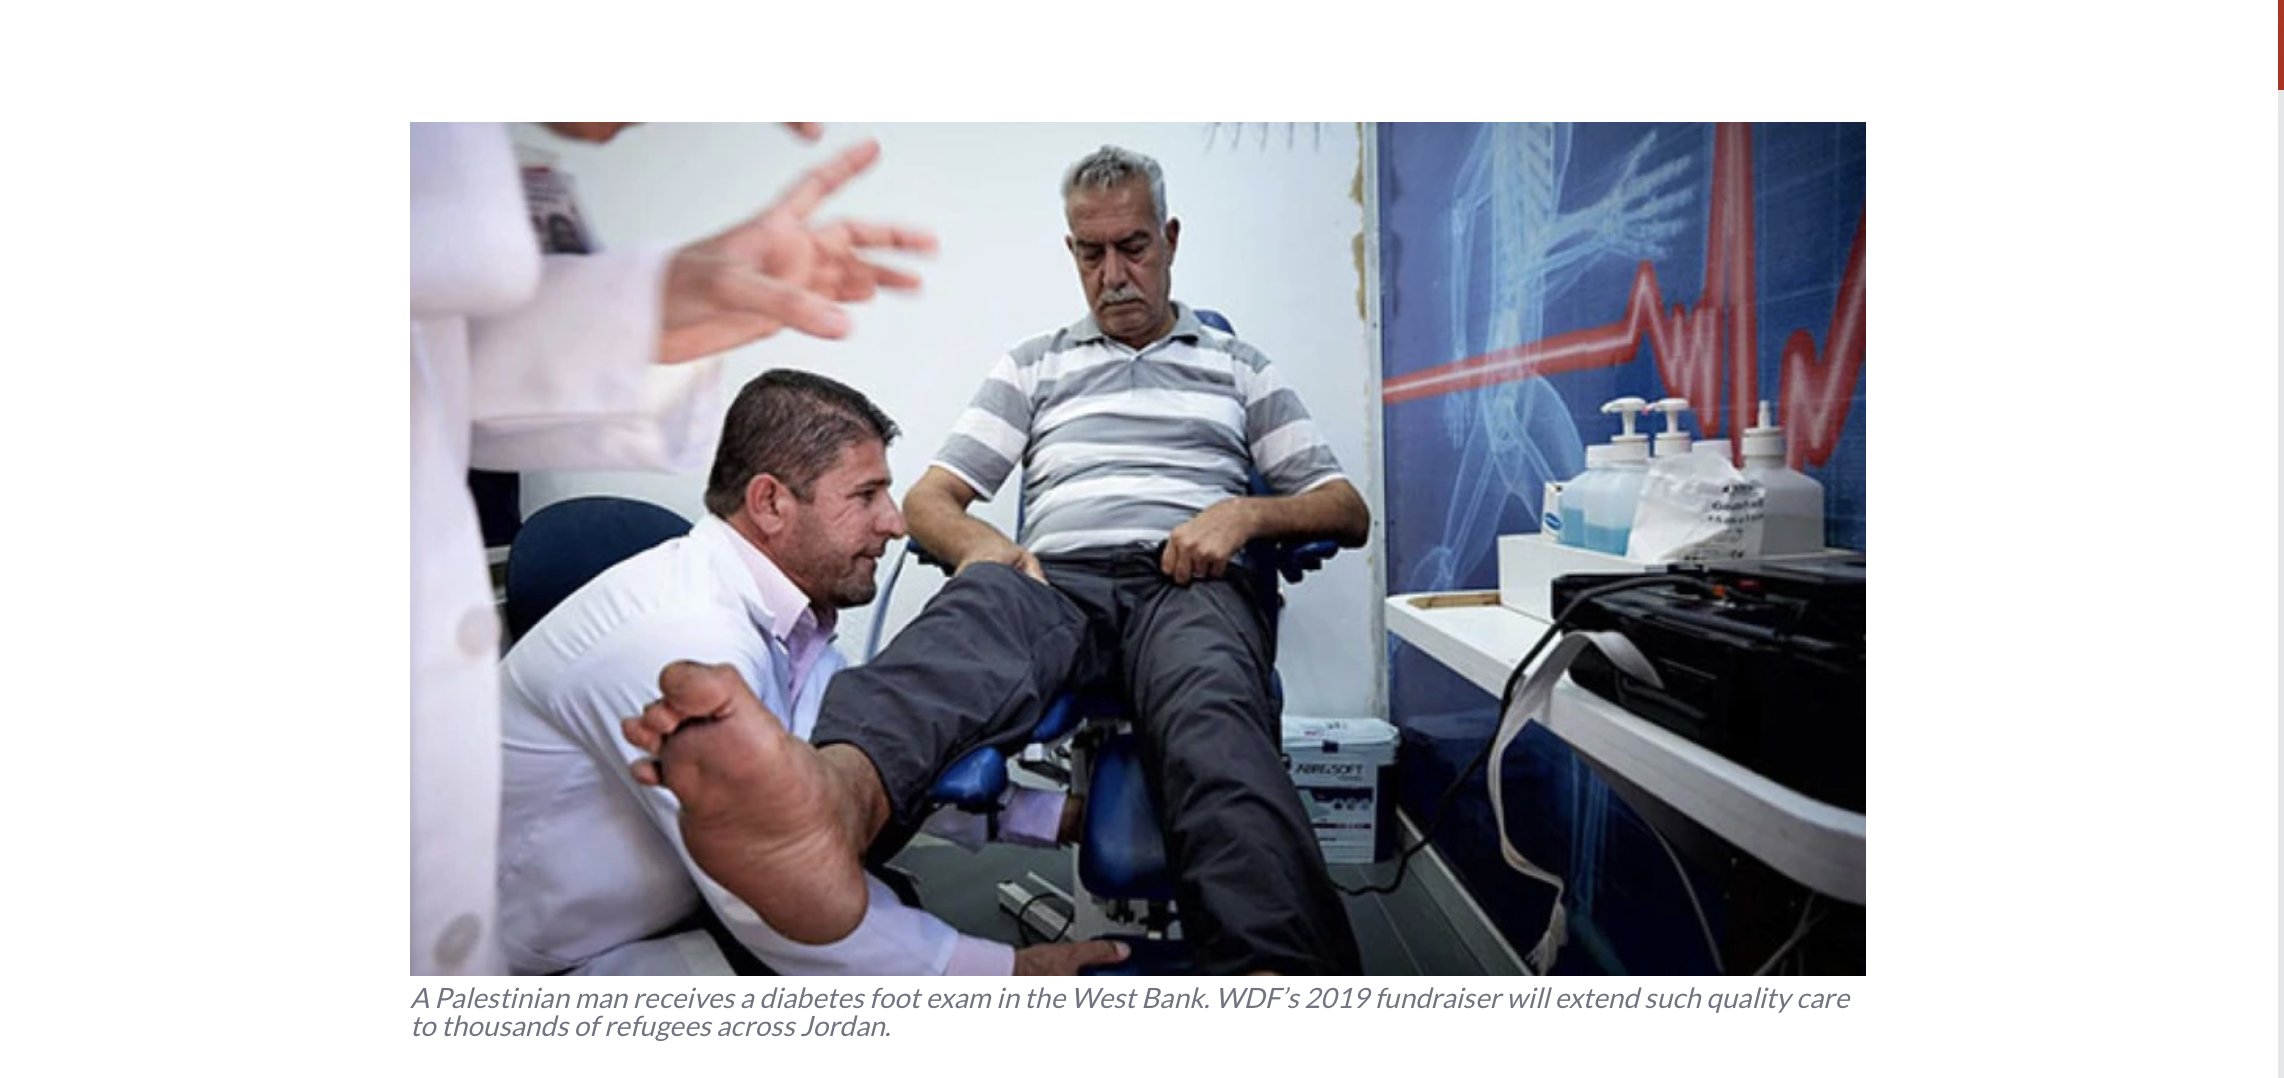 Improving foot care for refugees